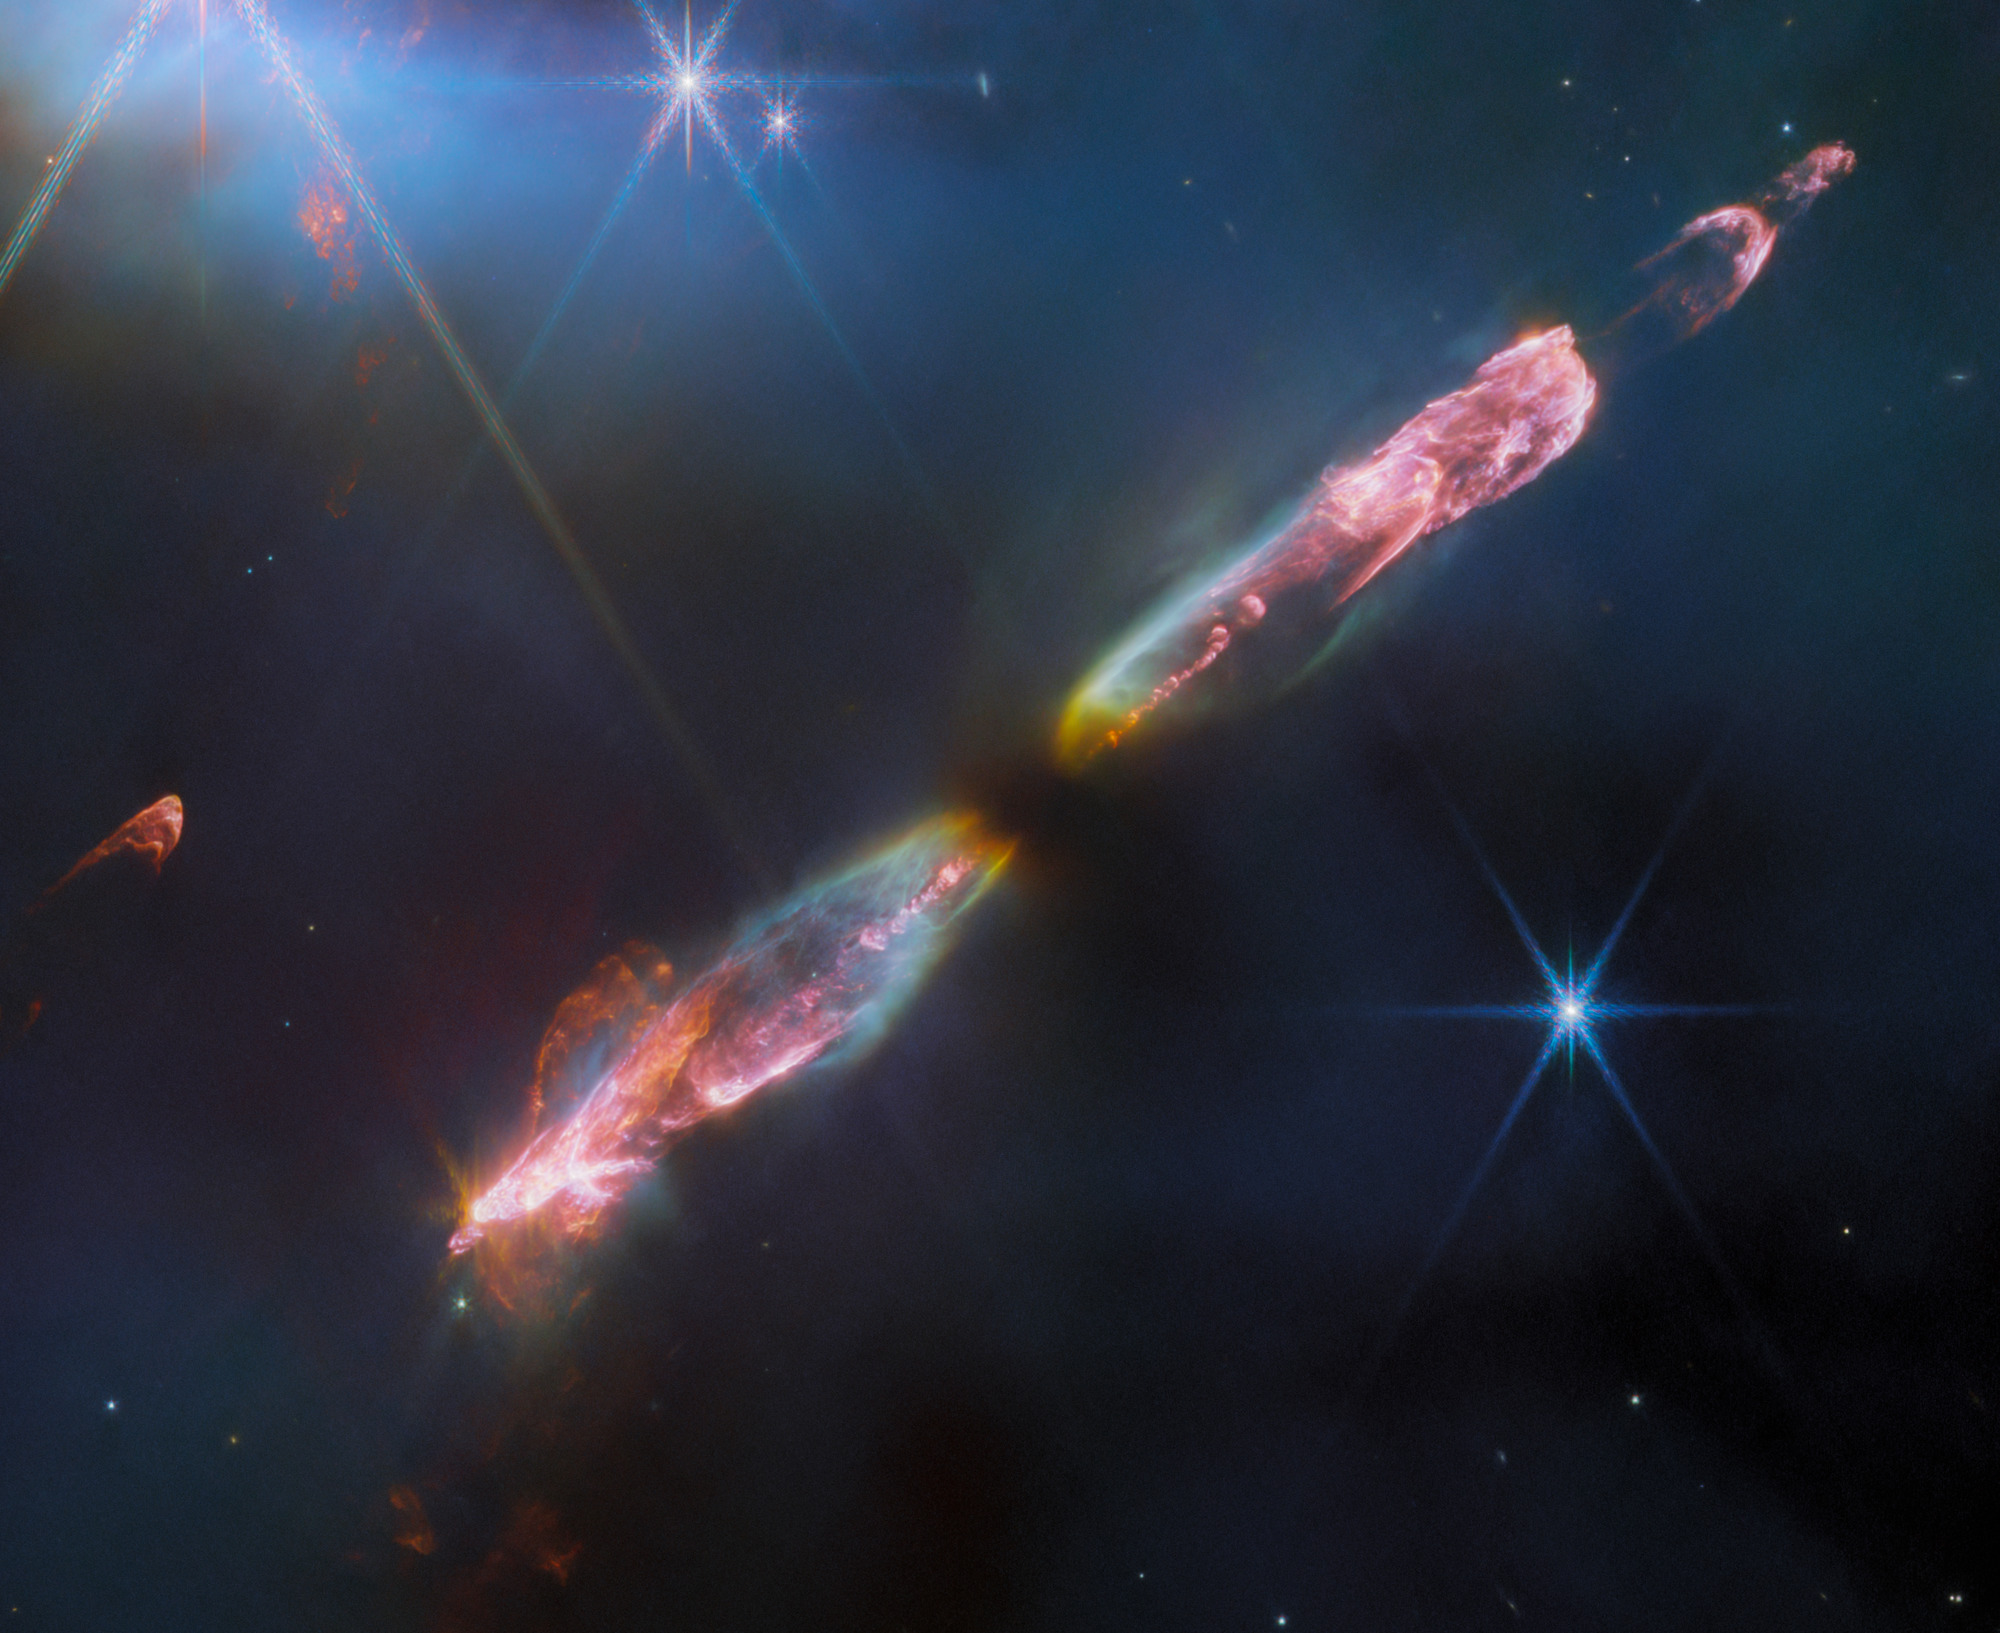 At the center is a thin horizontal pinkish cloud known as Herbig-Haro 211 that is uneven with rounded ends, and tilted from bottom left to top right. It takes up about two-thirds of the length of this angle, but is thinner and longer at the opposite angle. At its center is a dark spot. On either side of the dark spot, there are orangish yellow wisps that extend to light blue wisps. Within the center of those clouds, a pink fluffy streak runs through each lobe. At the ends of each lobe, pink becomes the dominant color. The lobe to the left is fatter. The right lobe is thinner, and ends in a smaller pink semi-circle. Just off the edge of this lobe is a slightly smaller pink semicircle, then a pink sponge-like blog. The background contains several bright stars, each with eight diffraction spikes extending out from the central bright point.